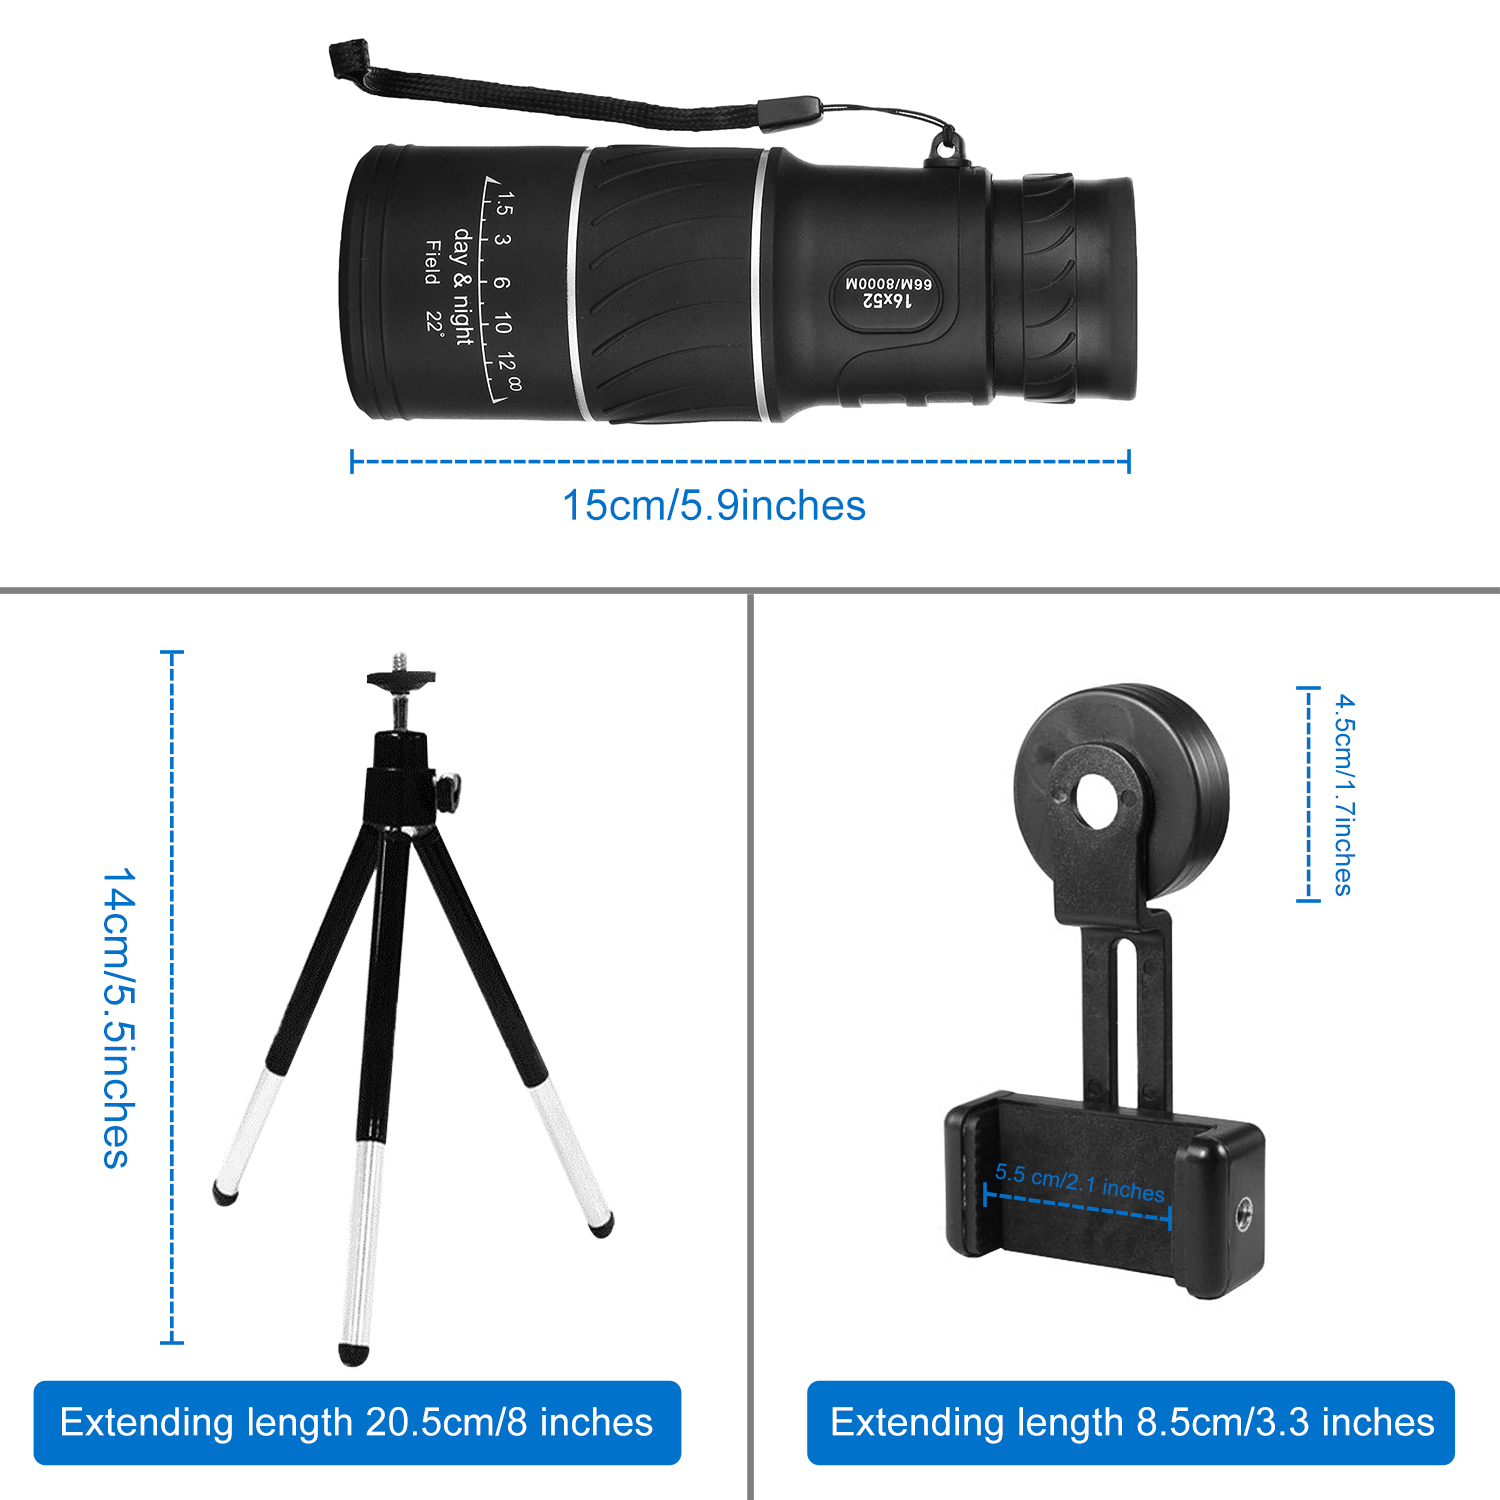 16x52 Monocular Telescope,AOBETAK High Power Spotting Scopes Equipped With Phone Adaptor and Tripod, Low Light Night Vision Binoculars or Adults Kids Bird Watching Traveling, Outdoors 98m/ 8000m